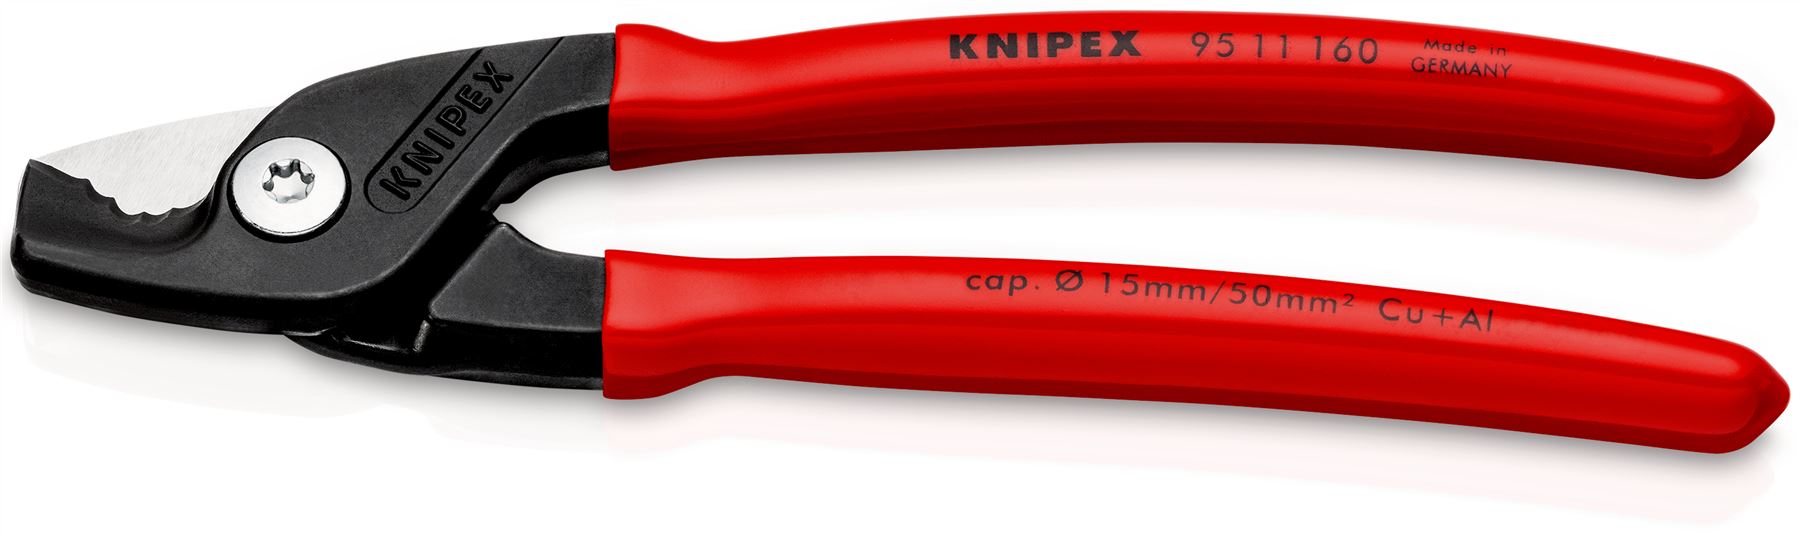 Knipex StepCut Cable Shears Cutting Pliers 15mm Capacity 160mm 95 11 160